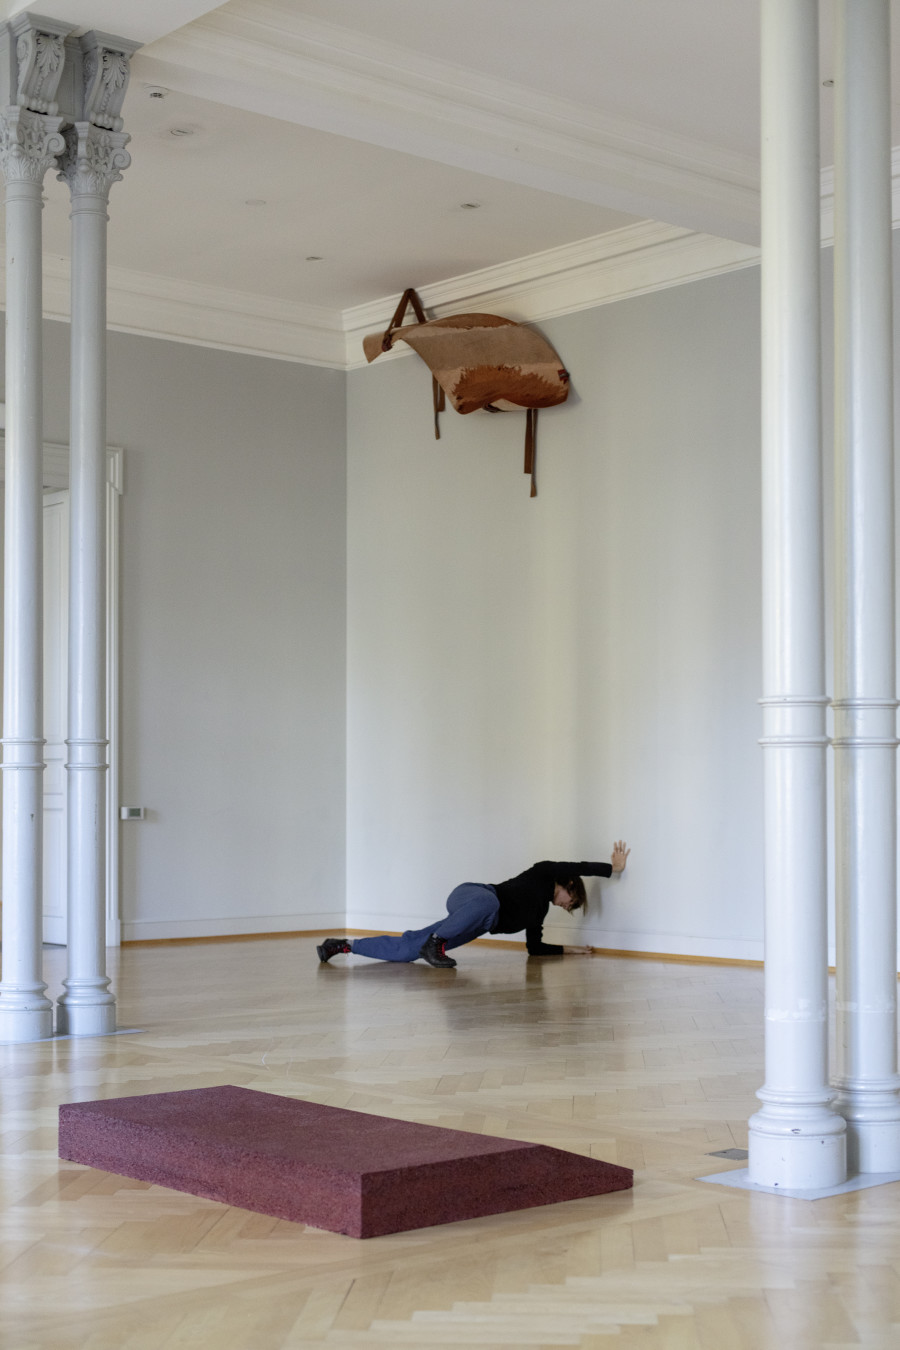 Cally Spooner, An Exchangeable Solo Built From The Knowledge Of Two Non-Exchangeable Groups, 2016 / 2021, Solo Tänzerin, neun choreographische Sequenzen Performt von Magdalyne Segale (*1991, US), Courtesy gb agency, Paris, Foto: Stefan Rohner